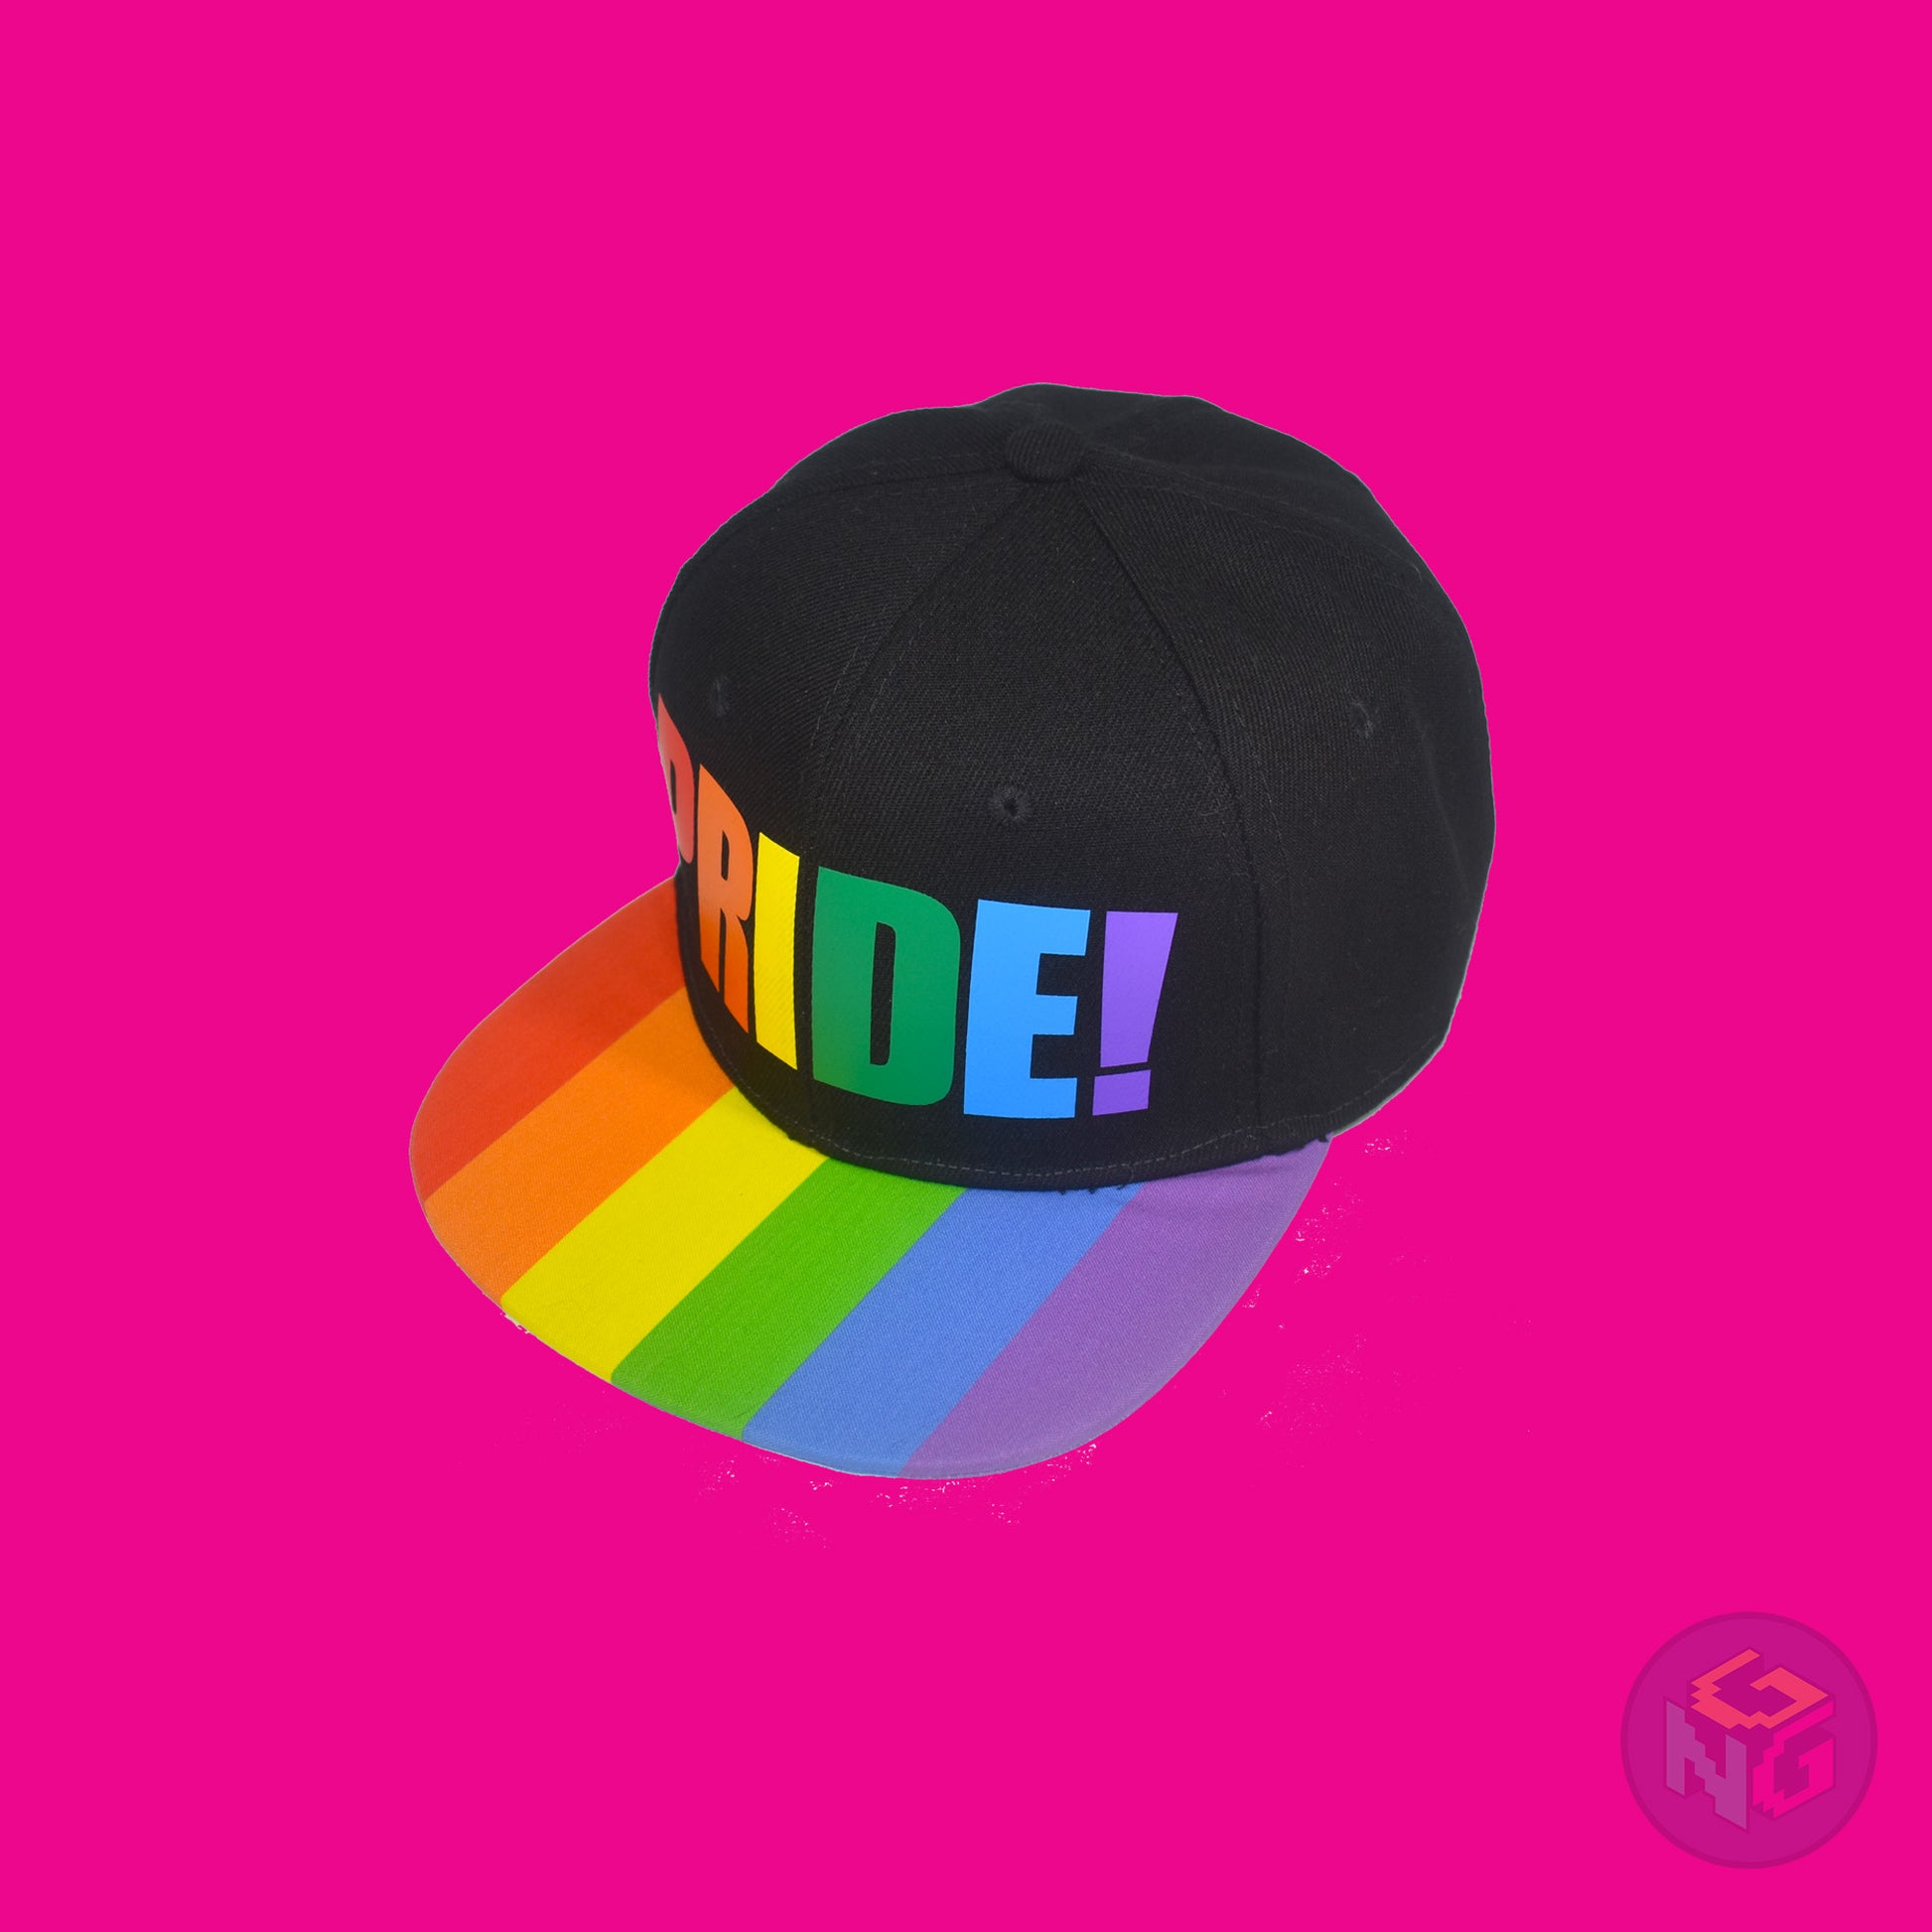 Black flat bill snapback hat. The brim has the rainbow pride flag on both sides and the front of the hat has the word “PRIDE!” in rainbow letters. Front left view